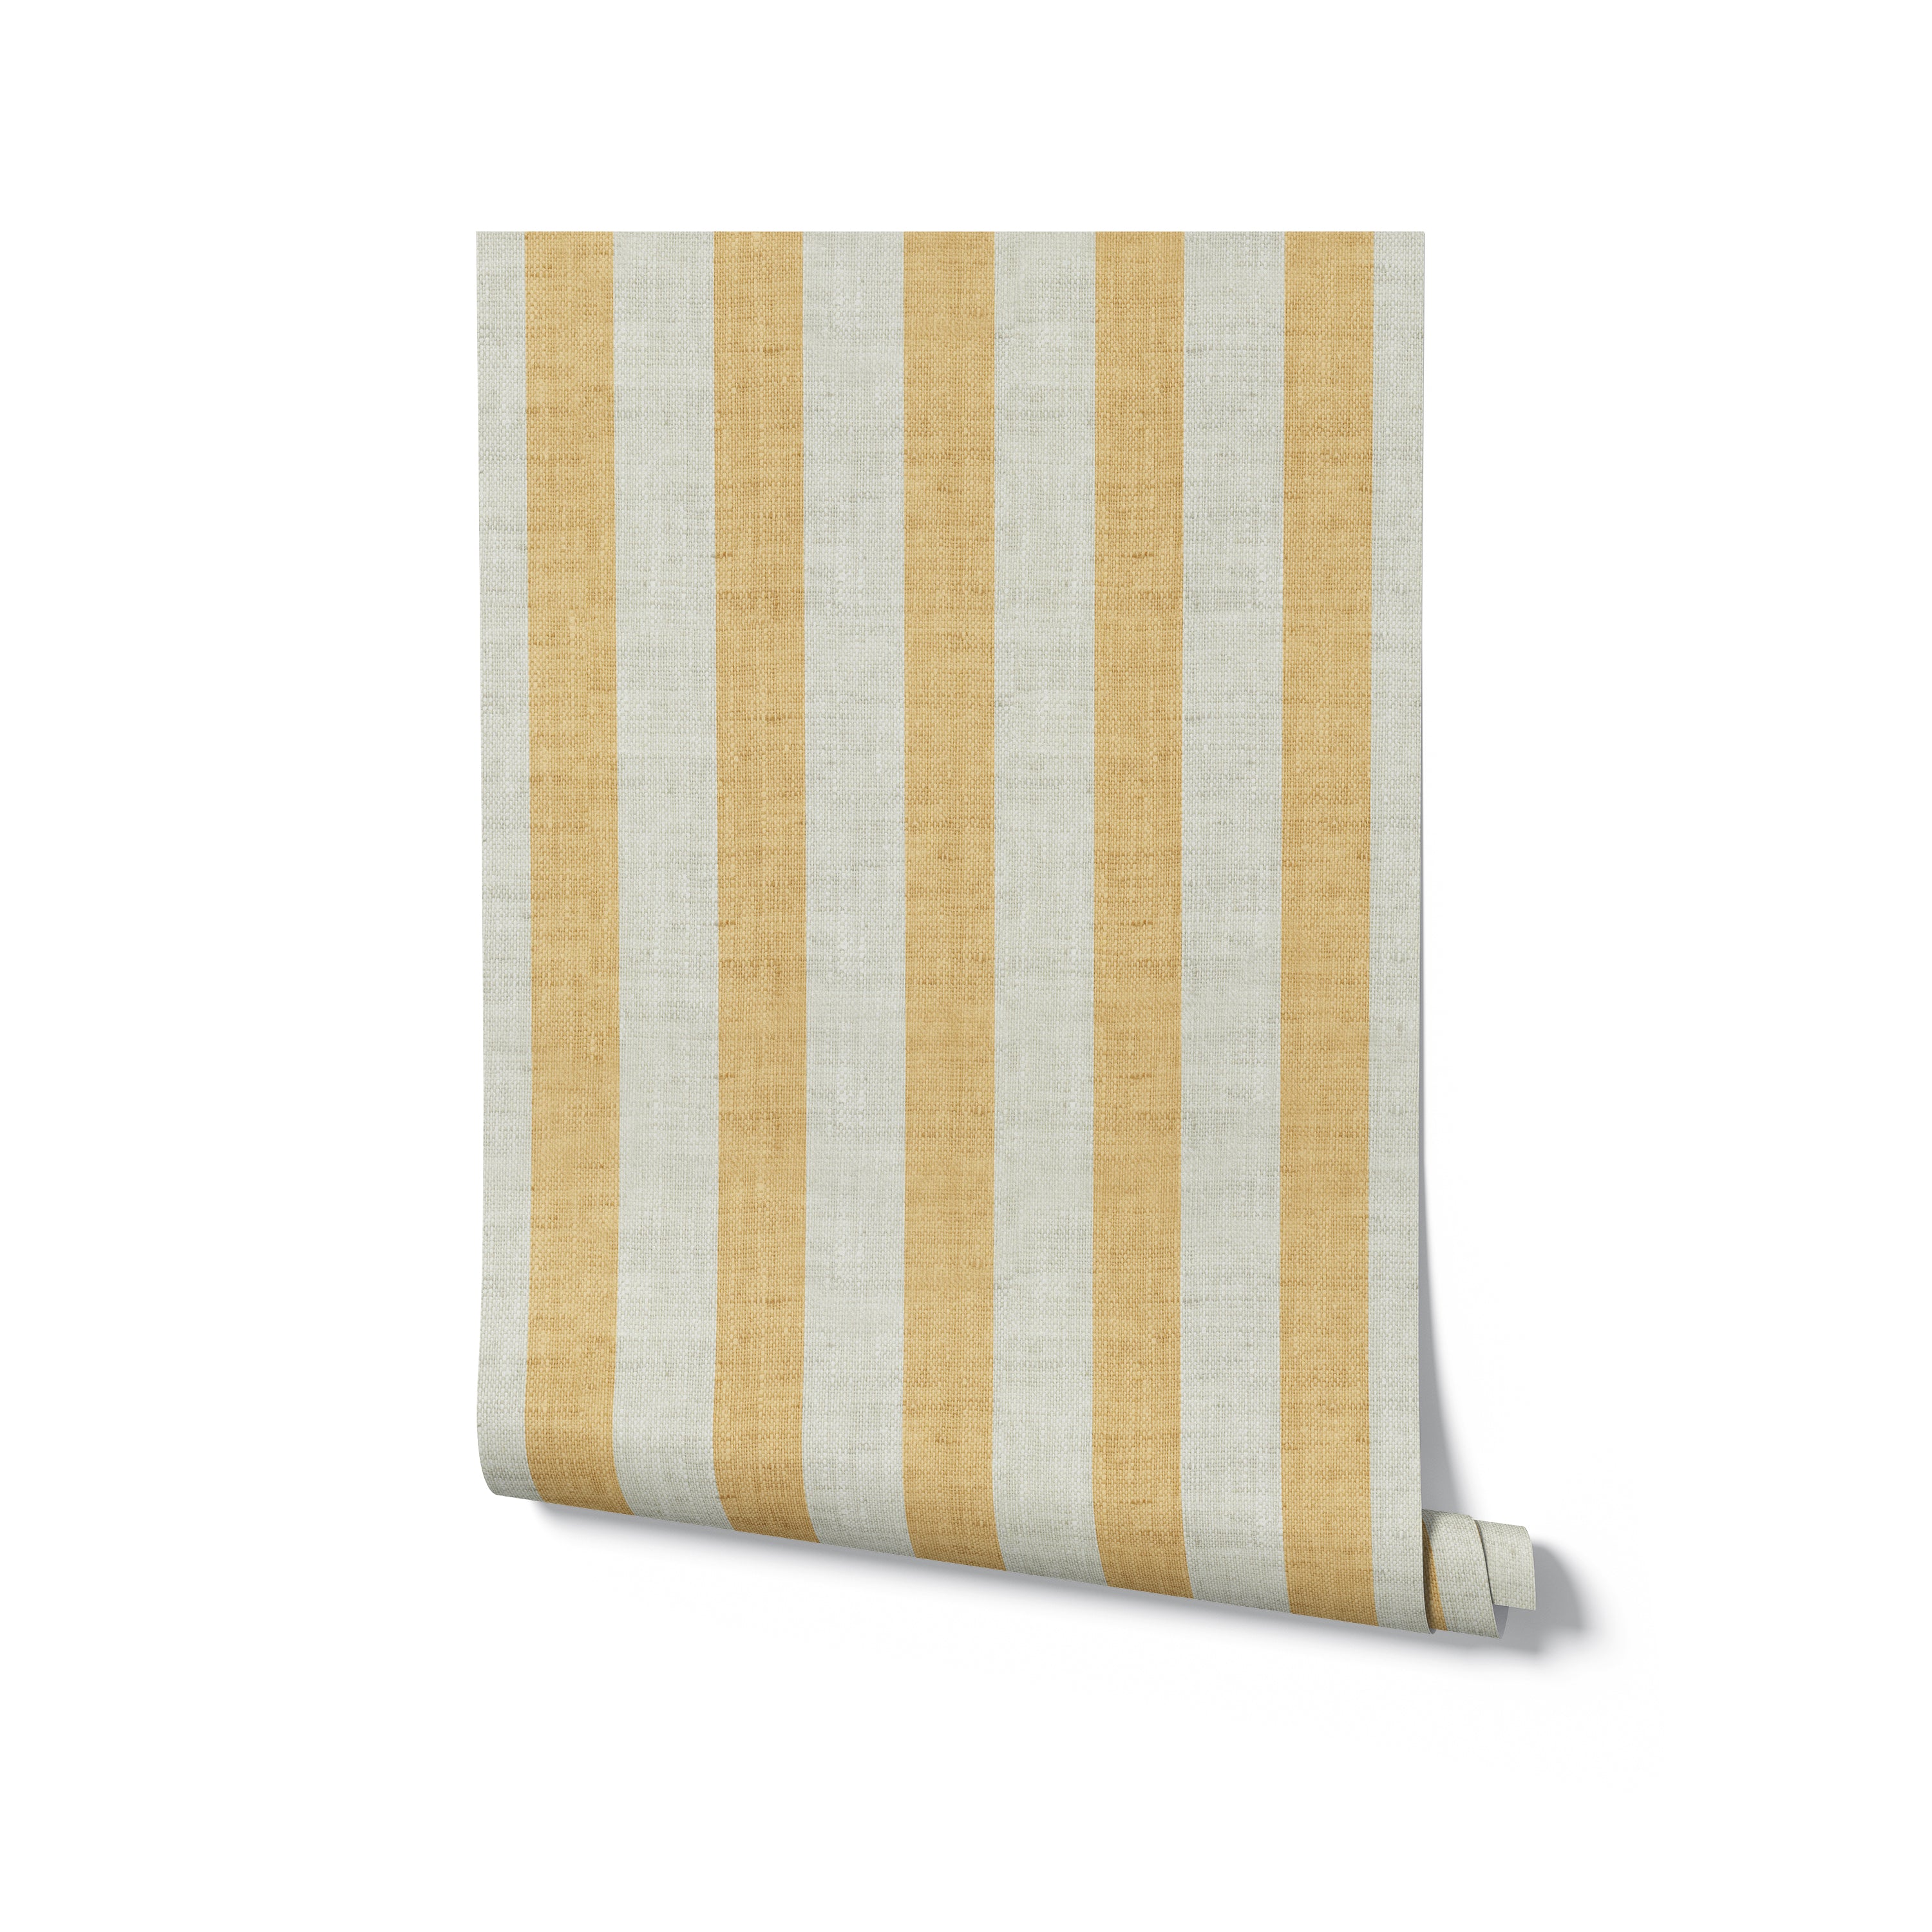 Rolled up view of Ticking Fabrics 7 Wallpaper, showcasing wide vertical stripes in yellow and cream. The linen-like texture adds a tactile quality, perfect for creating a warm and inviting environment in residential or commercial settings